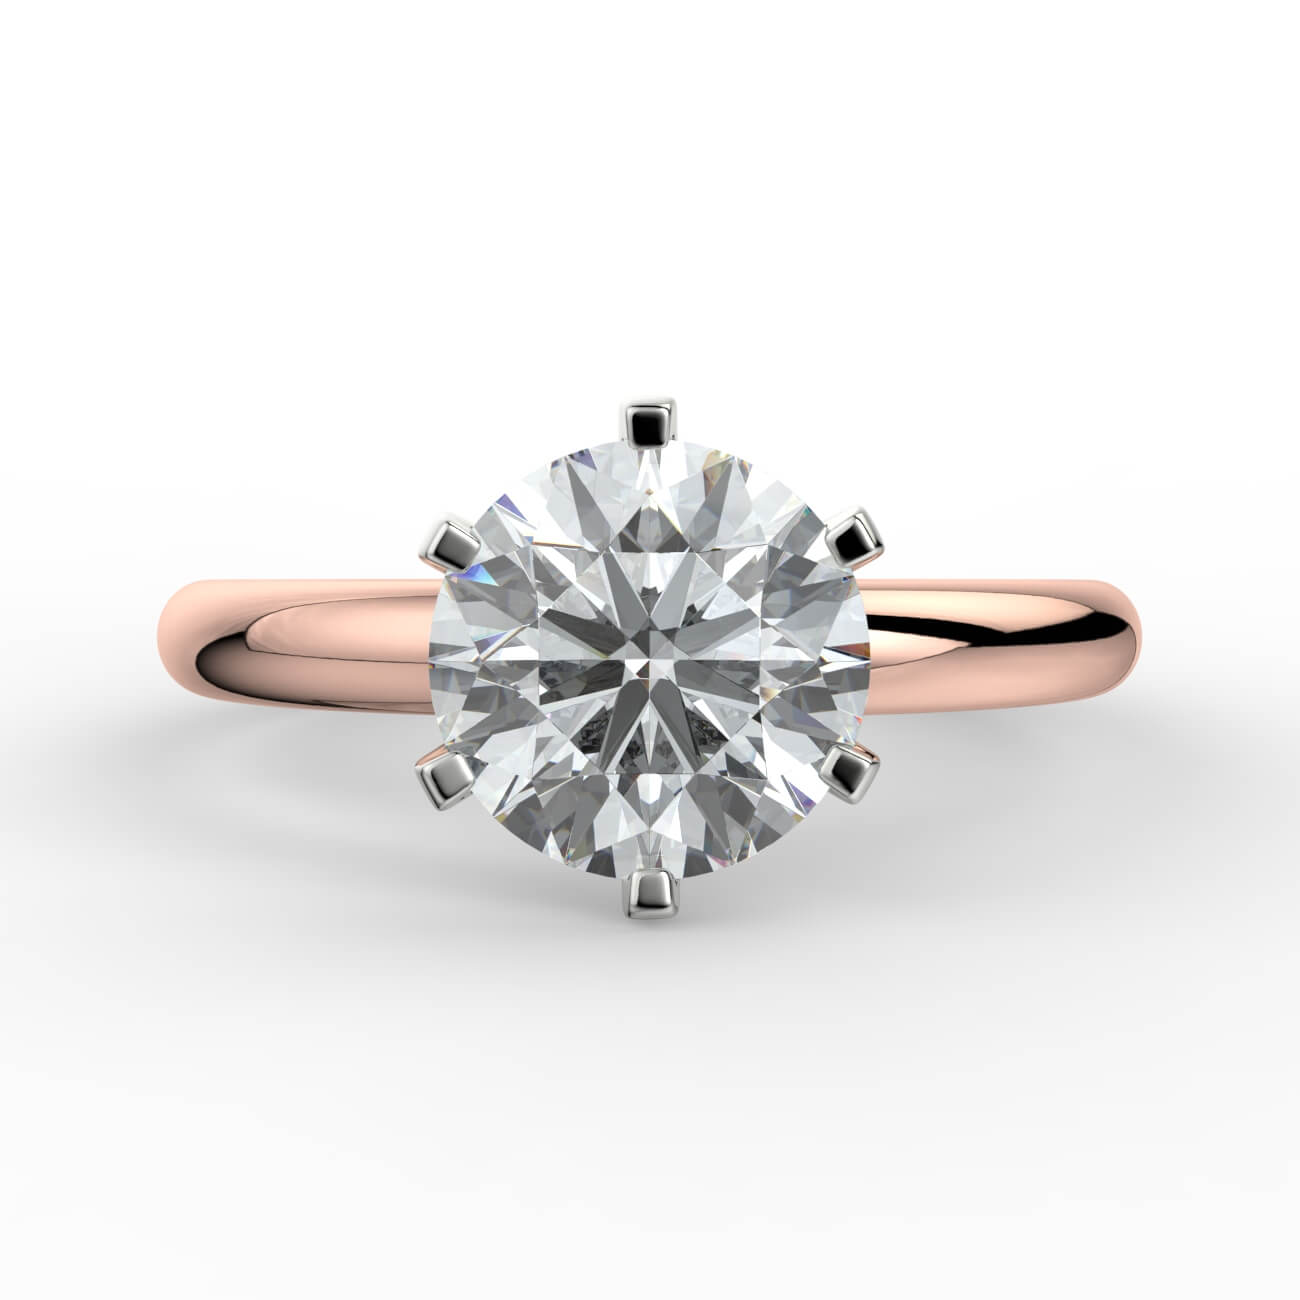 Comfort fit 6 claw solitaire diamond ring in white and rose gold – Australian Diamond Network